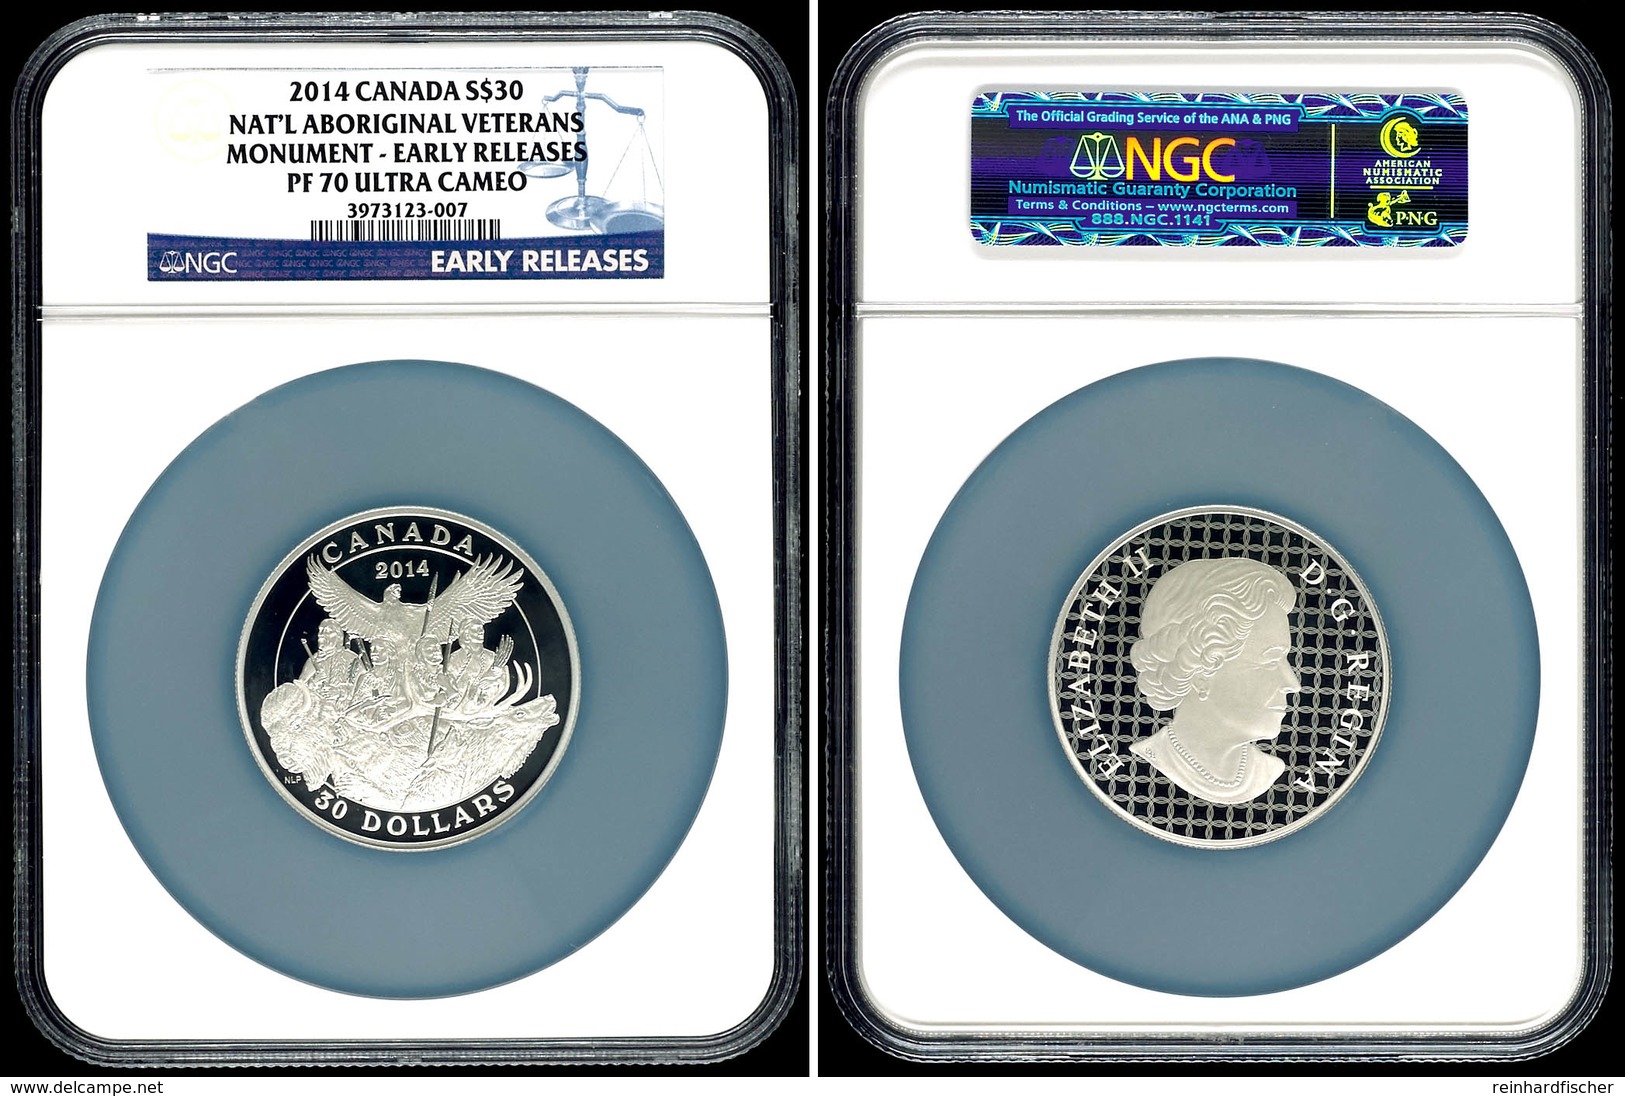 30 Dollars, 2014, National Aboriginal Veterans Monument, In Slab Der NGC Mit Der Bewertung PF70 Ultra Cameo, Early Relea - Canada